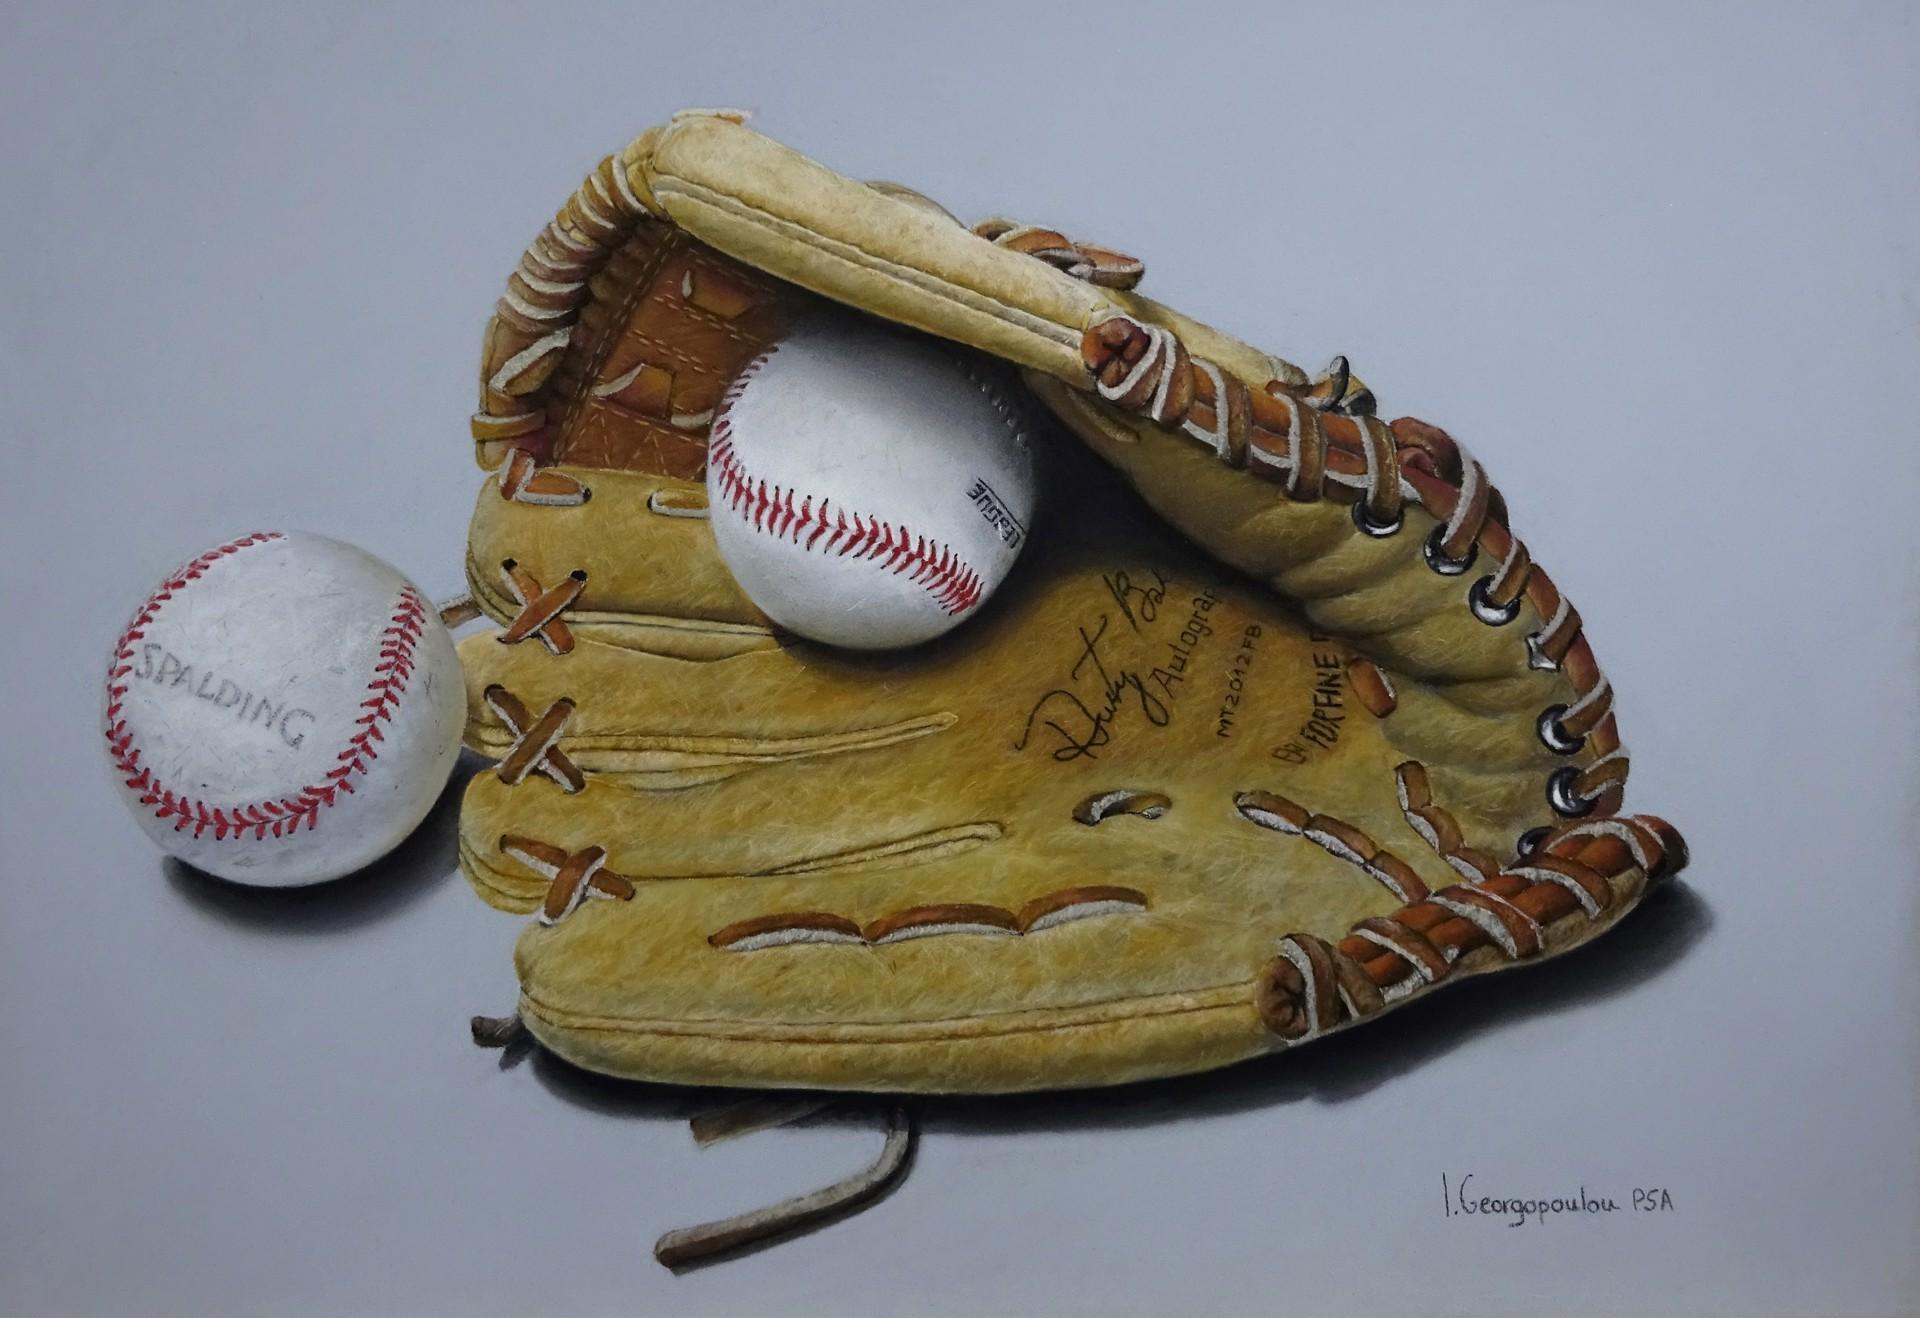 Irene Georgopoulou's "Vintage Catch" (2024) is an original soft pastels on paper artwork, measuring 8.50 x 11.50 inches. Part of her solo exhibition "Nostalgic Treasures: A Journey Through Time," this intricate still life features a lovingly